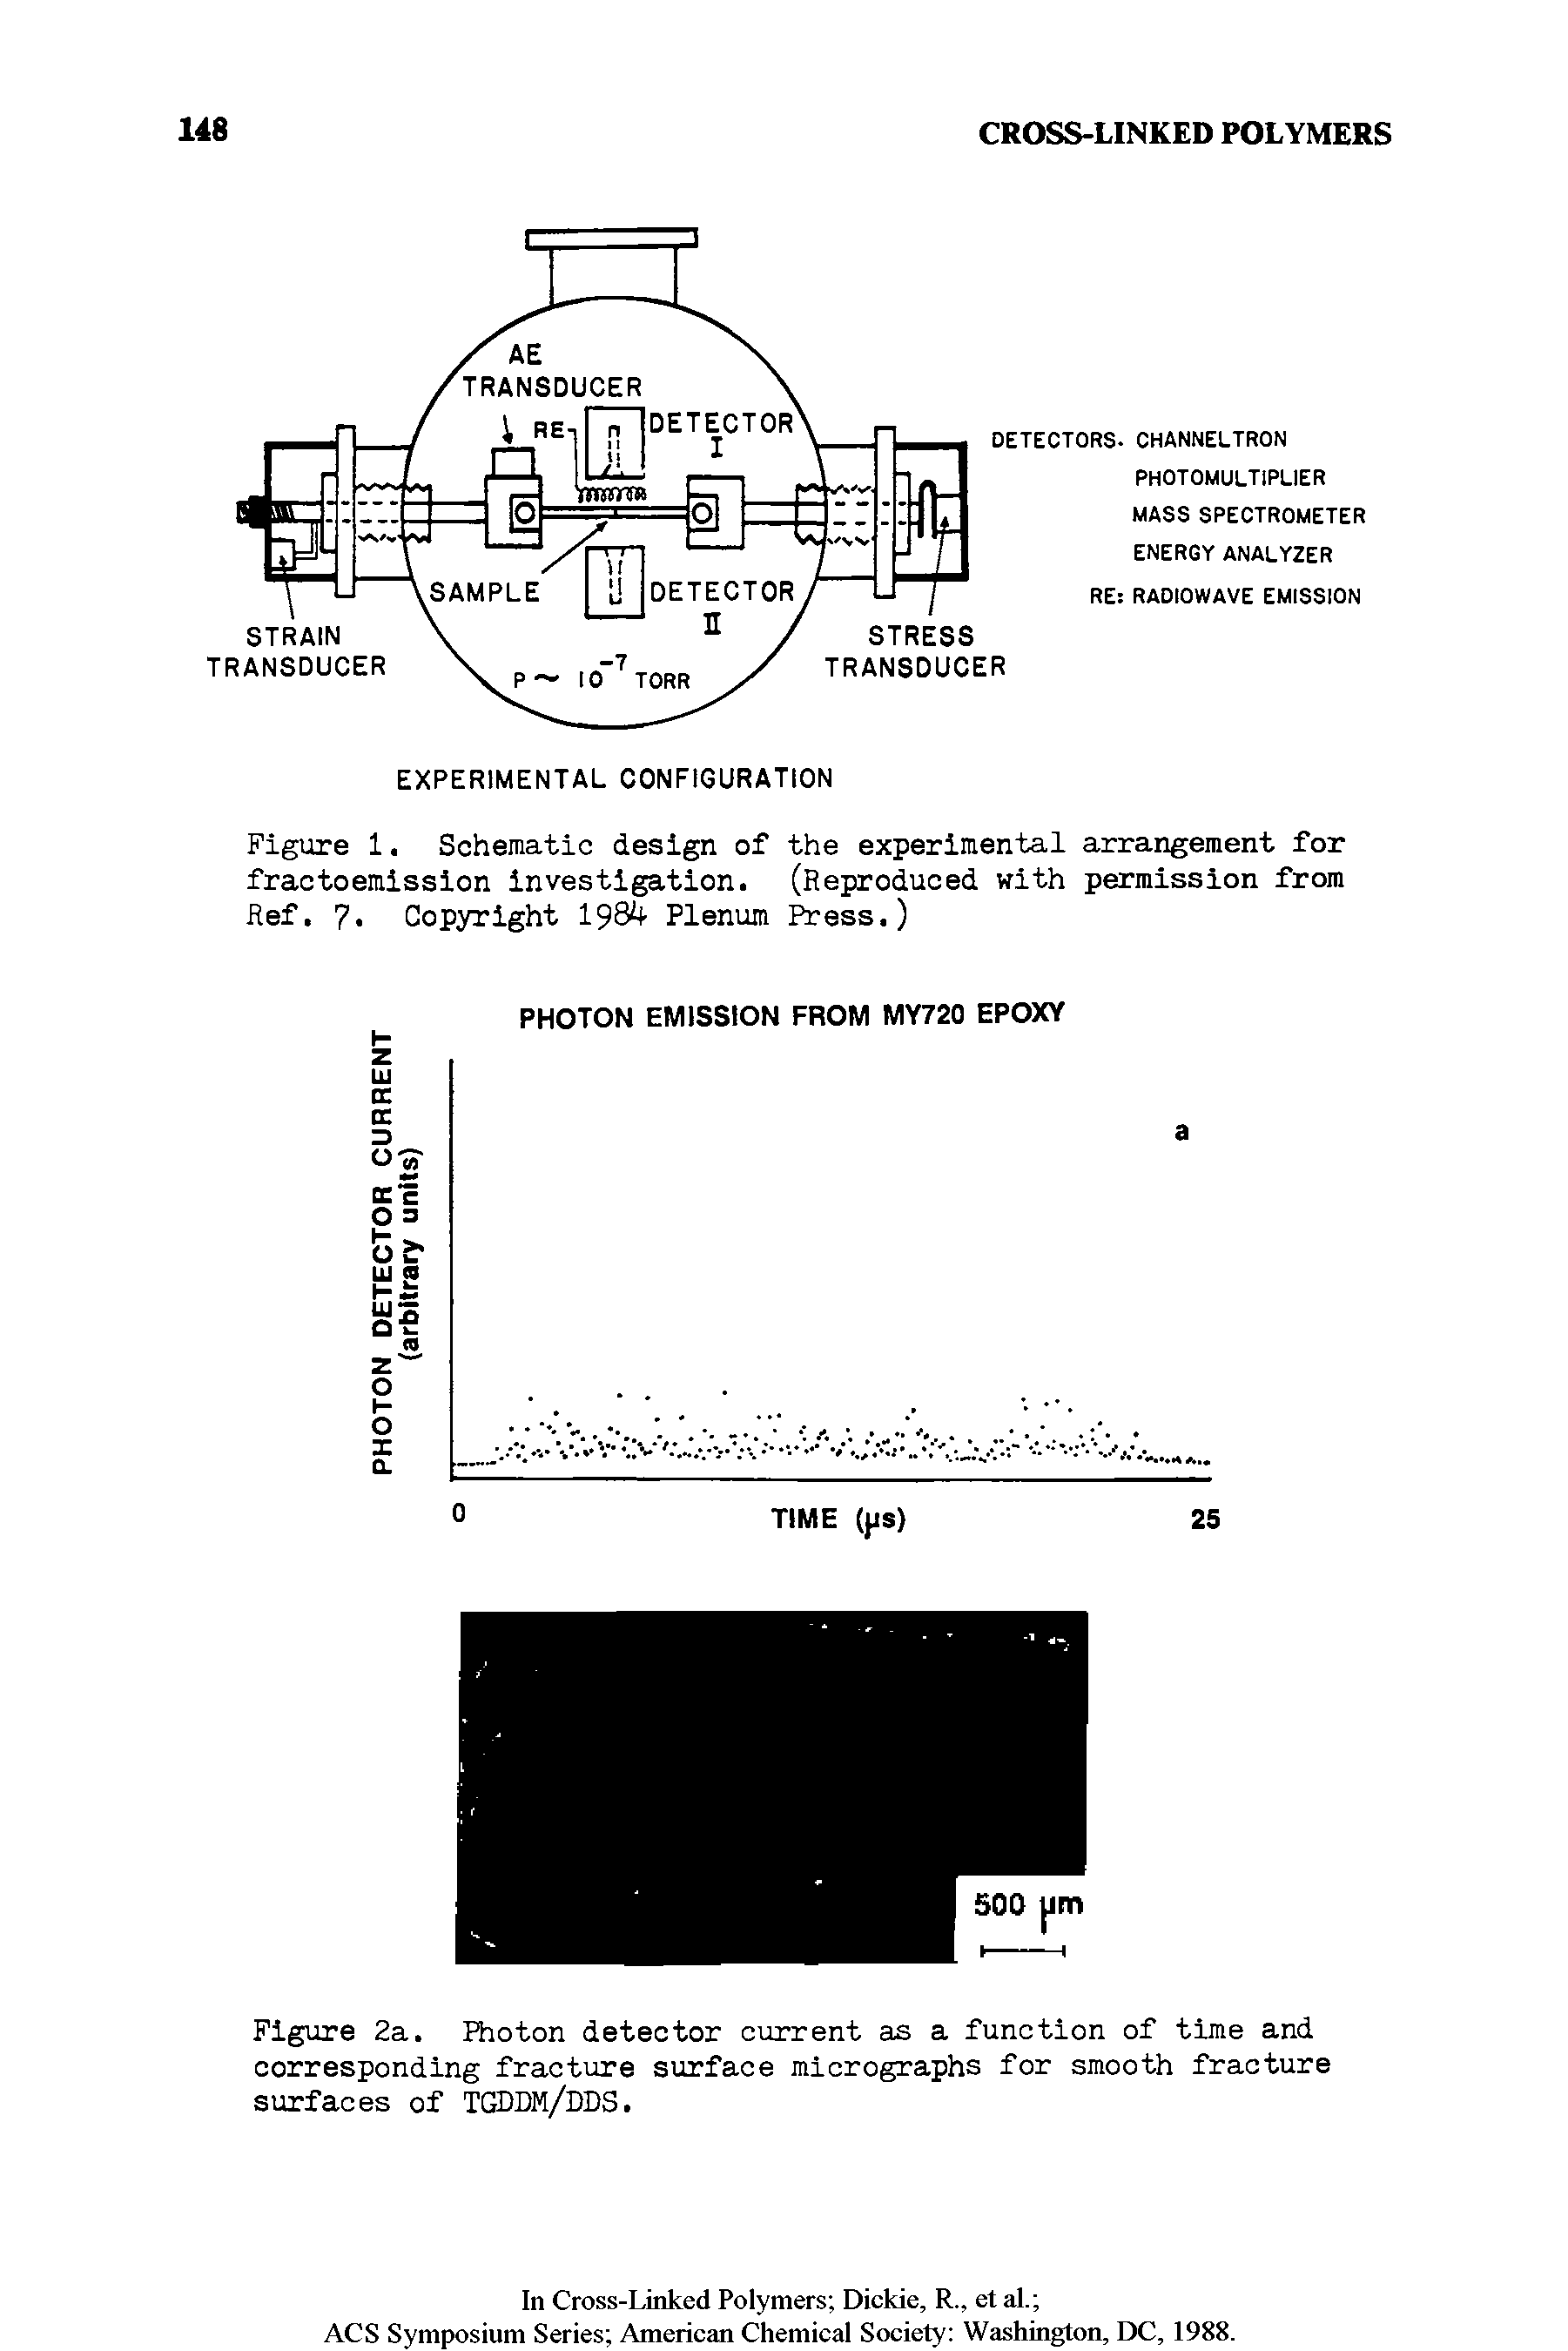 Figure 1. Schematic design of the experimental arrangement for fraotoemisslon investigation. (Reproduced with permission from Ref. 7. Copyright 1984 Plenum Press.)...